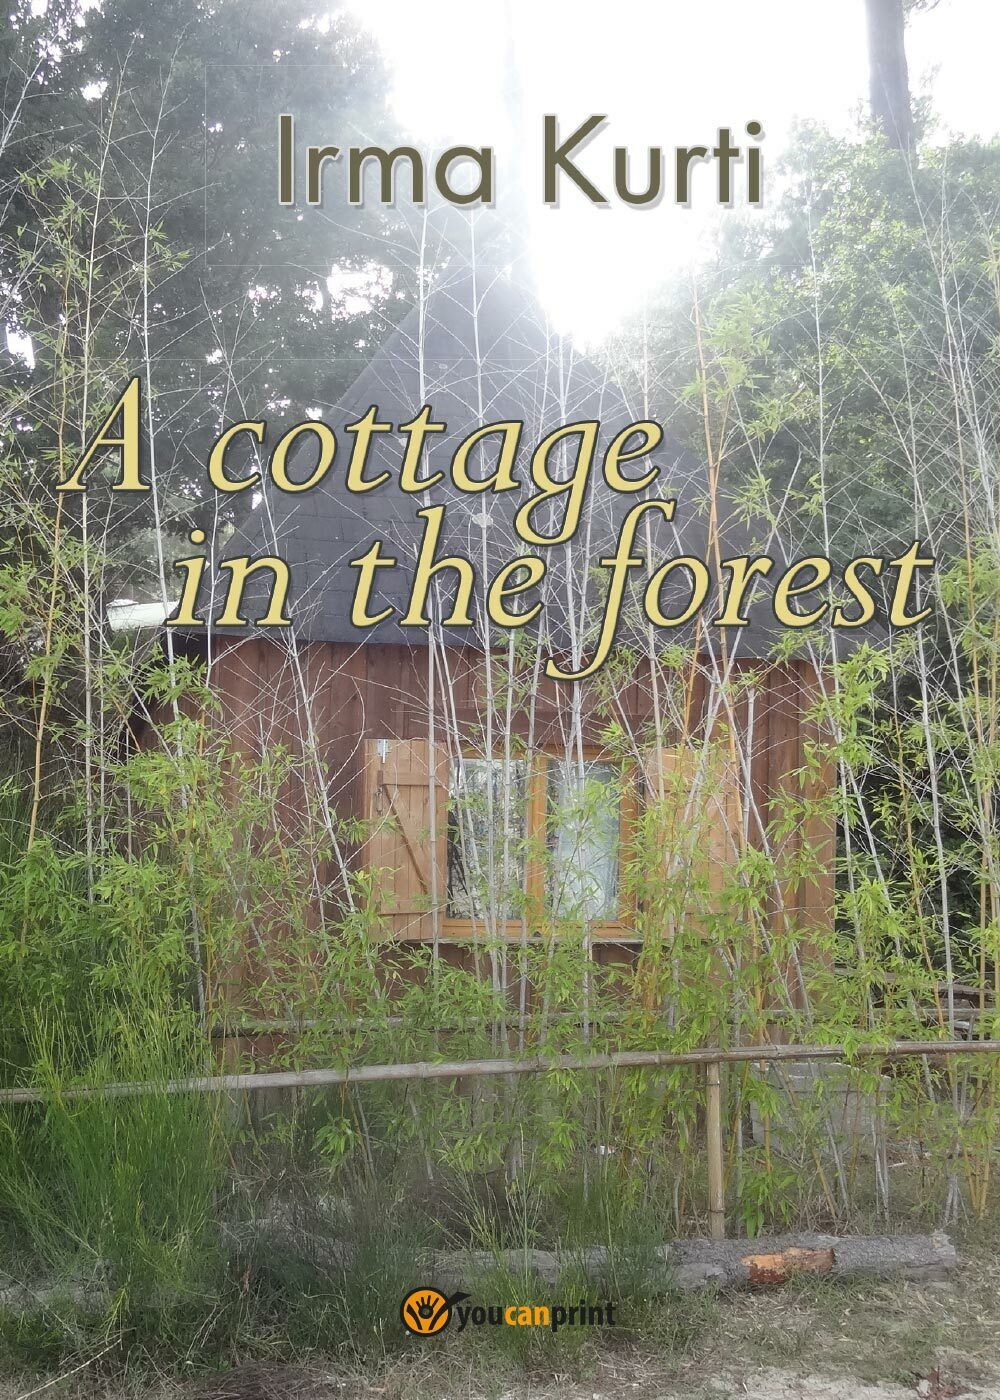 A cottage in the forest,  di Irma Kurti,  2016,  Youcanprint - ER libro usato